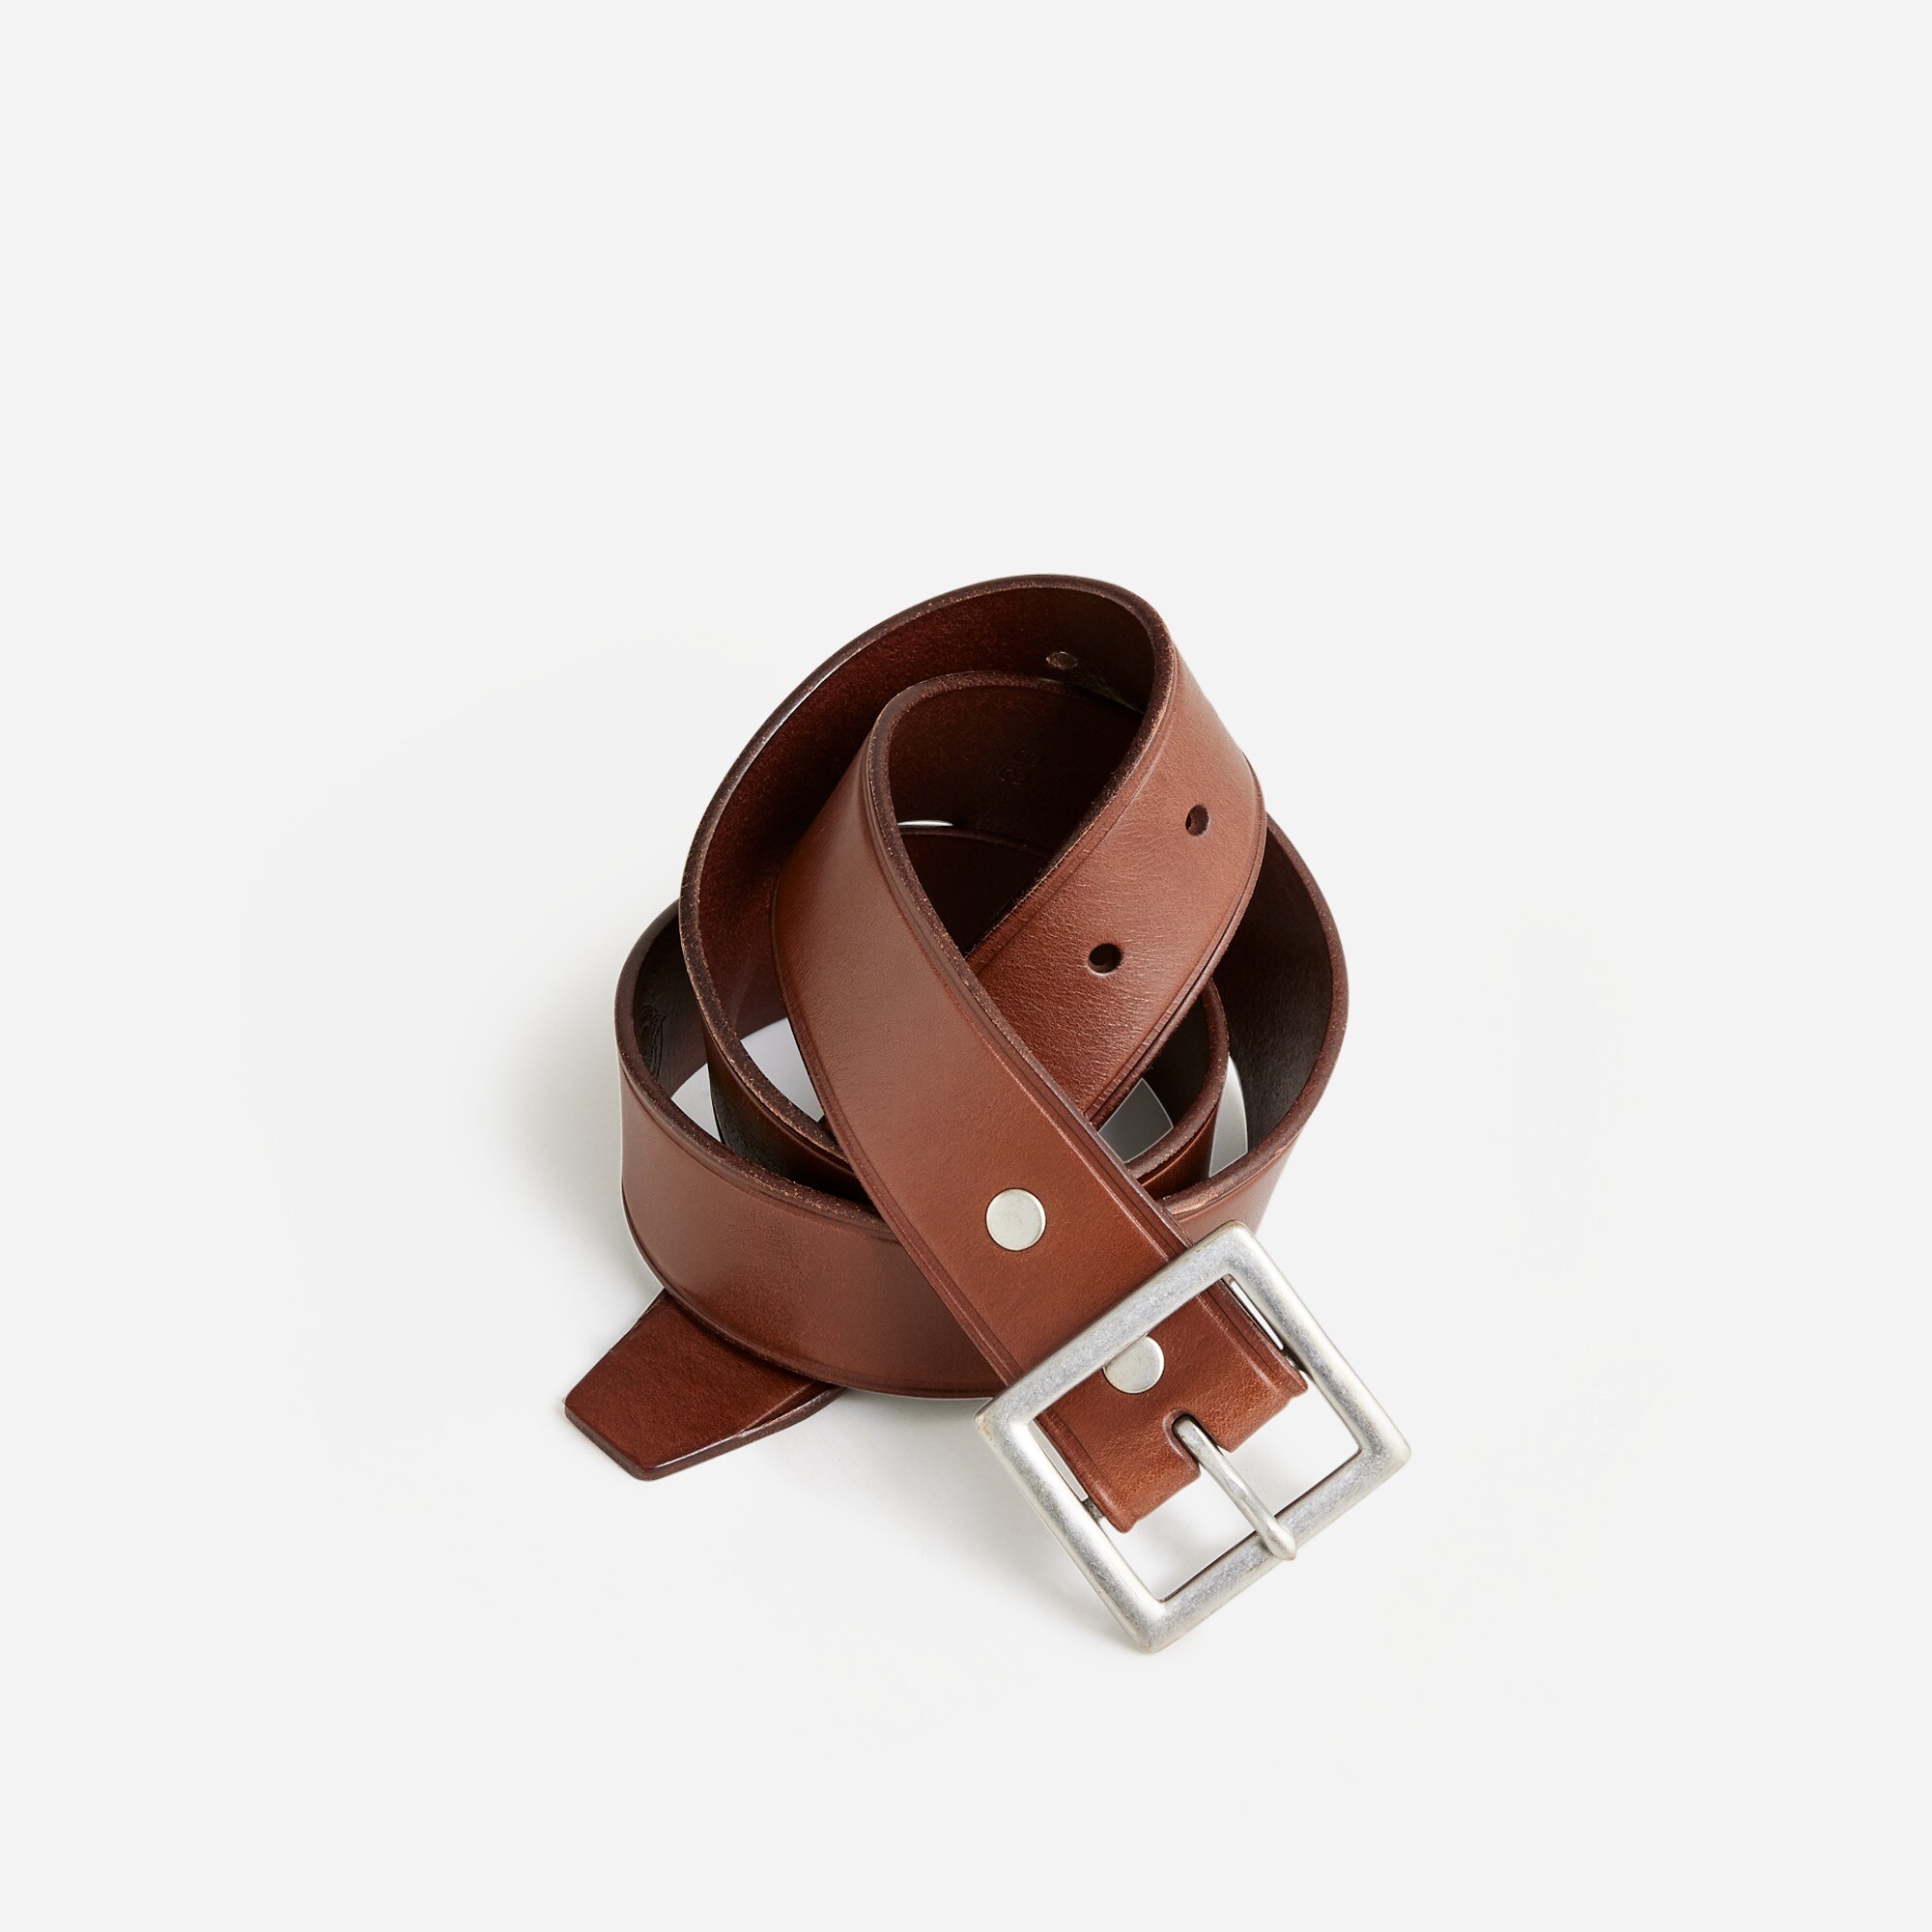  Wallace &amp; Barnes Italian leather belt with square brass buckle